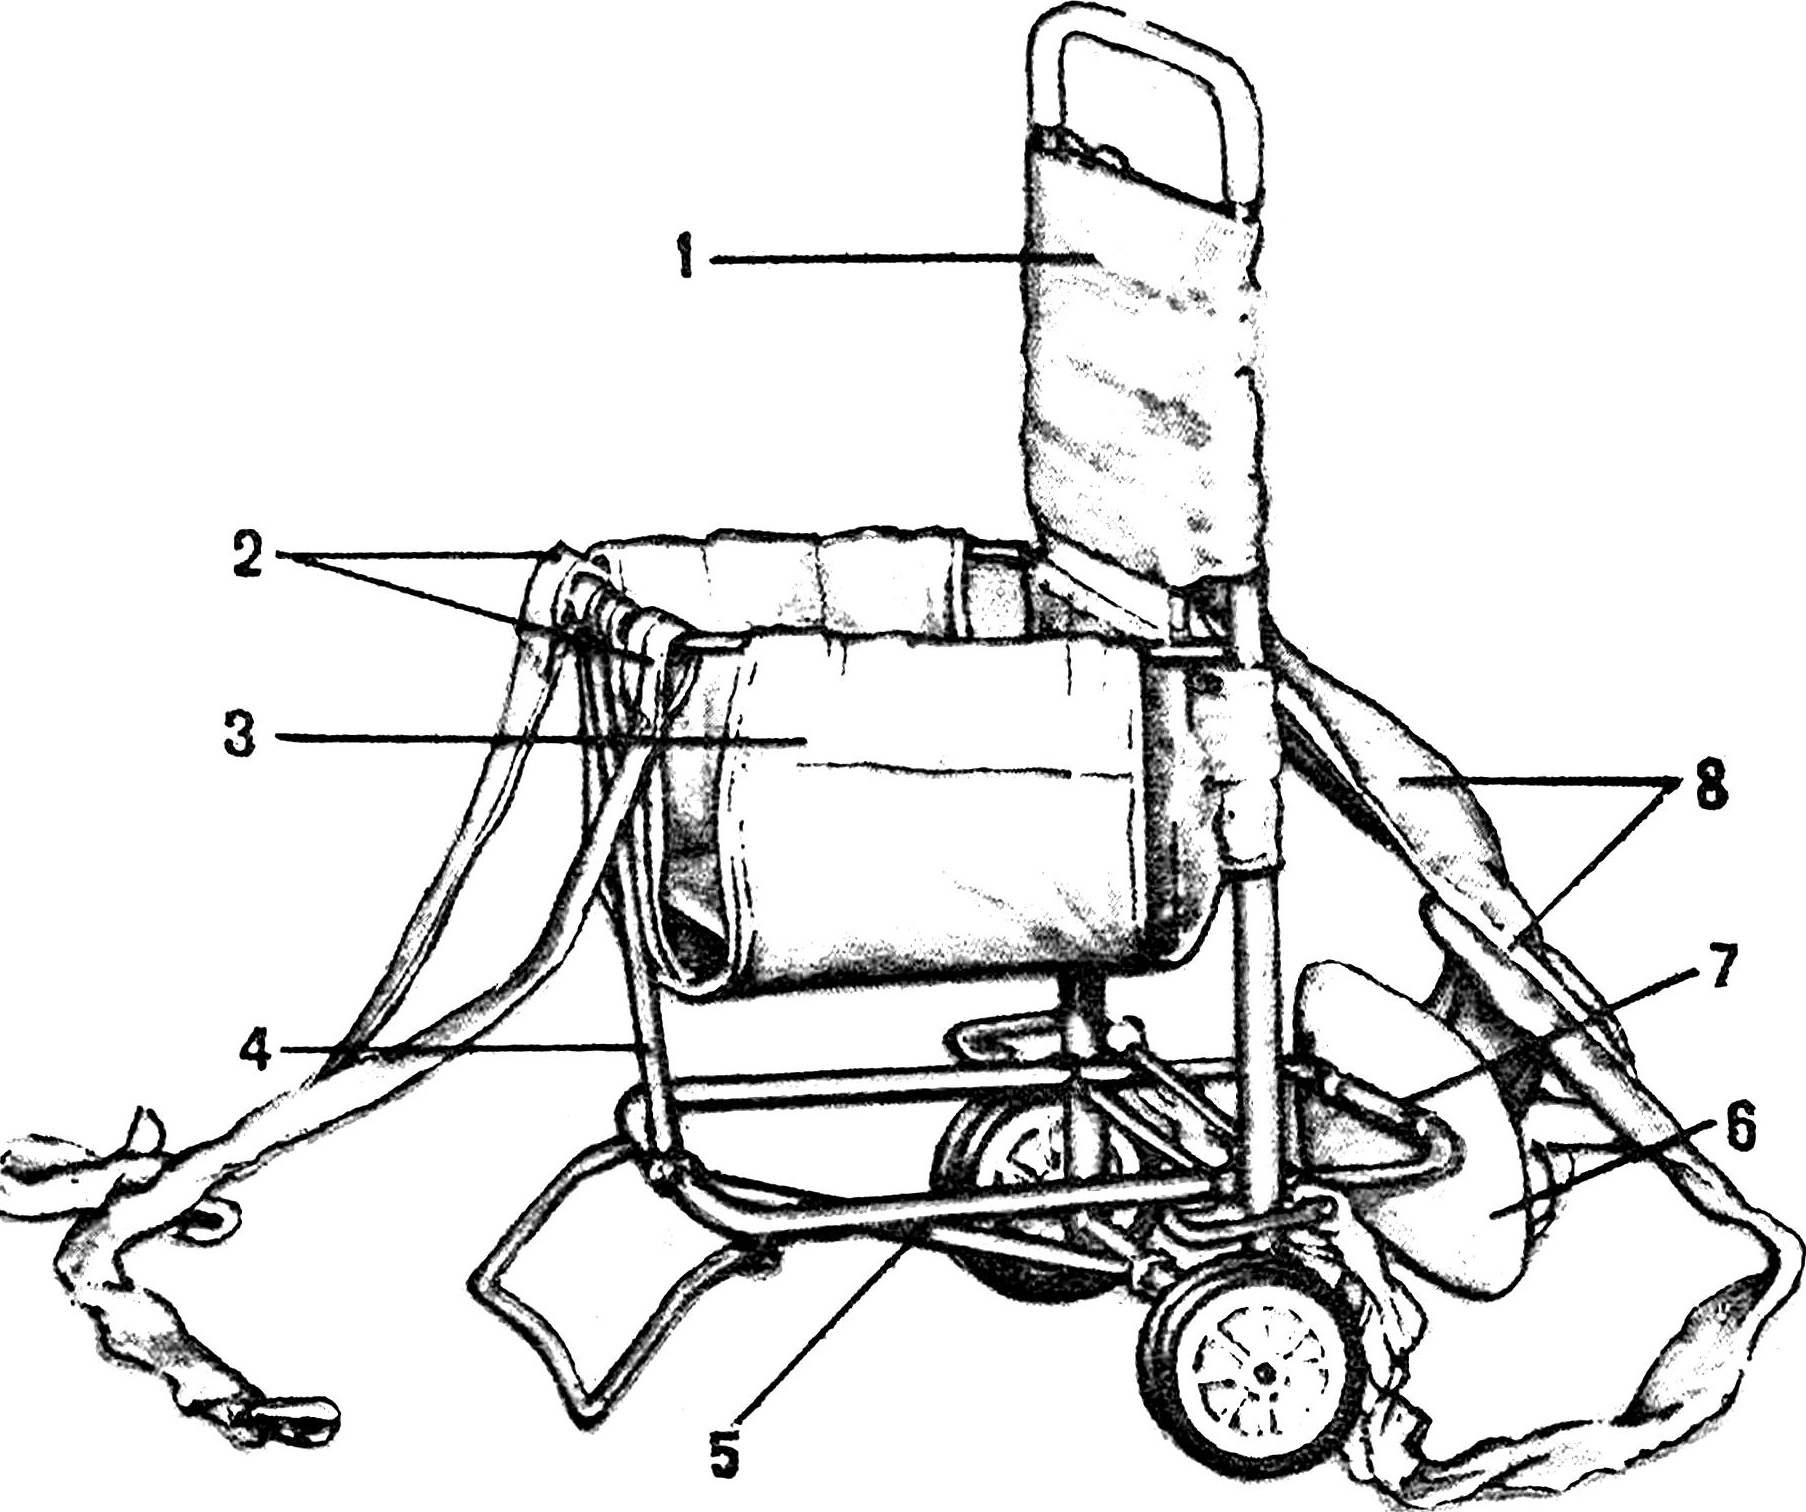 The basic elements of a Hiking stroller.